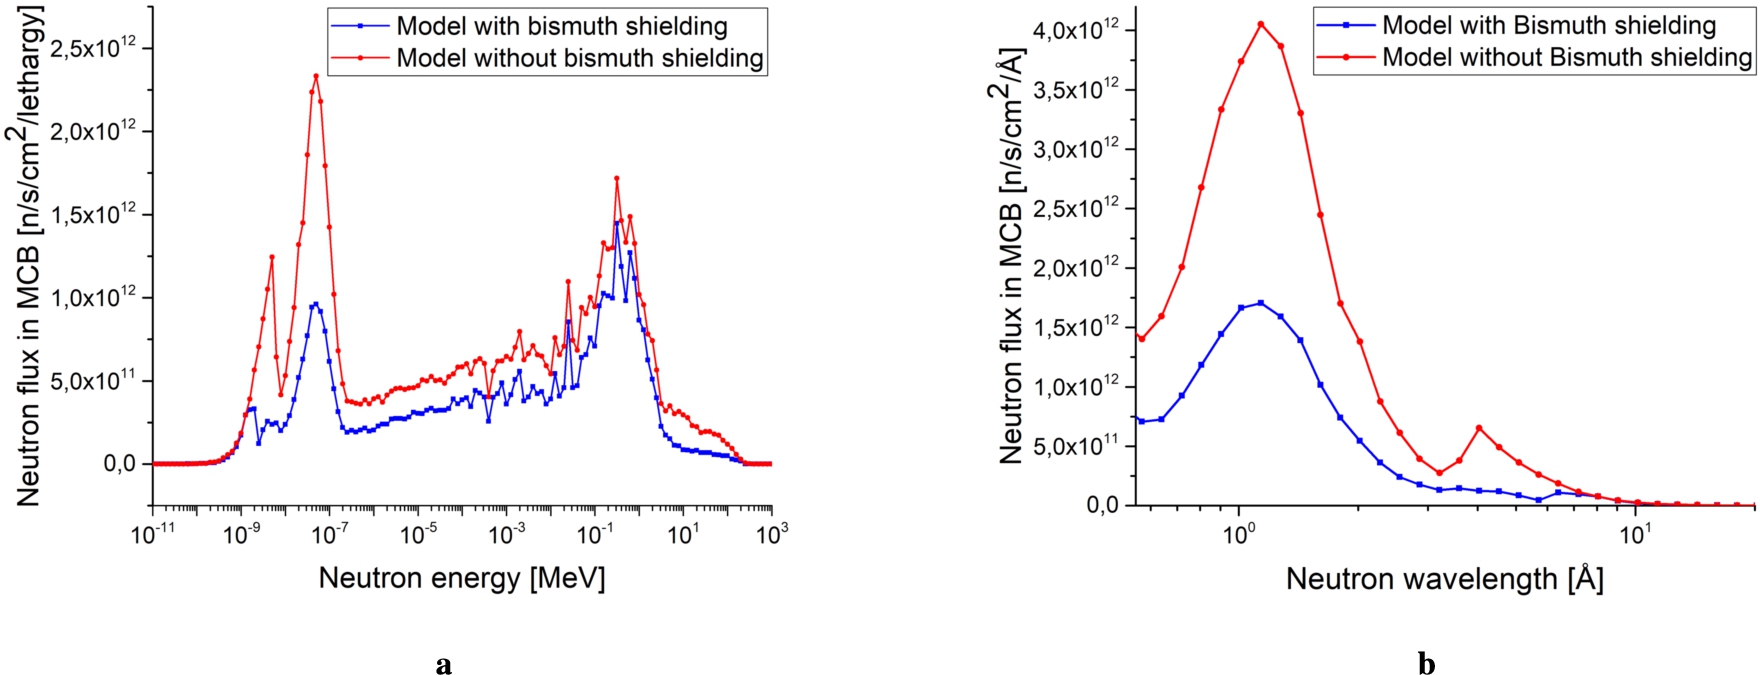 (A) the neutron spectrum in the MCB. The red line depicts the spectrum without bismuth shielding in the twister, and the blue line depicts the spectrum with bismuth shielding in the twister. (B) the flux of cold and thermal neutrons with wavelengths > 1 Å was clearly suppressed in the MCB by the bismuth shielding.